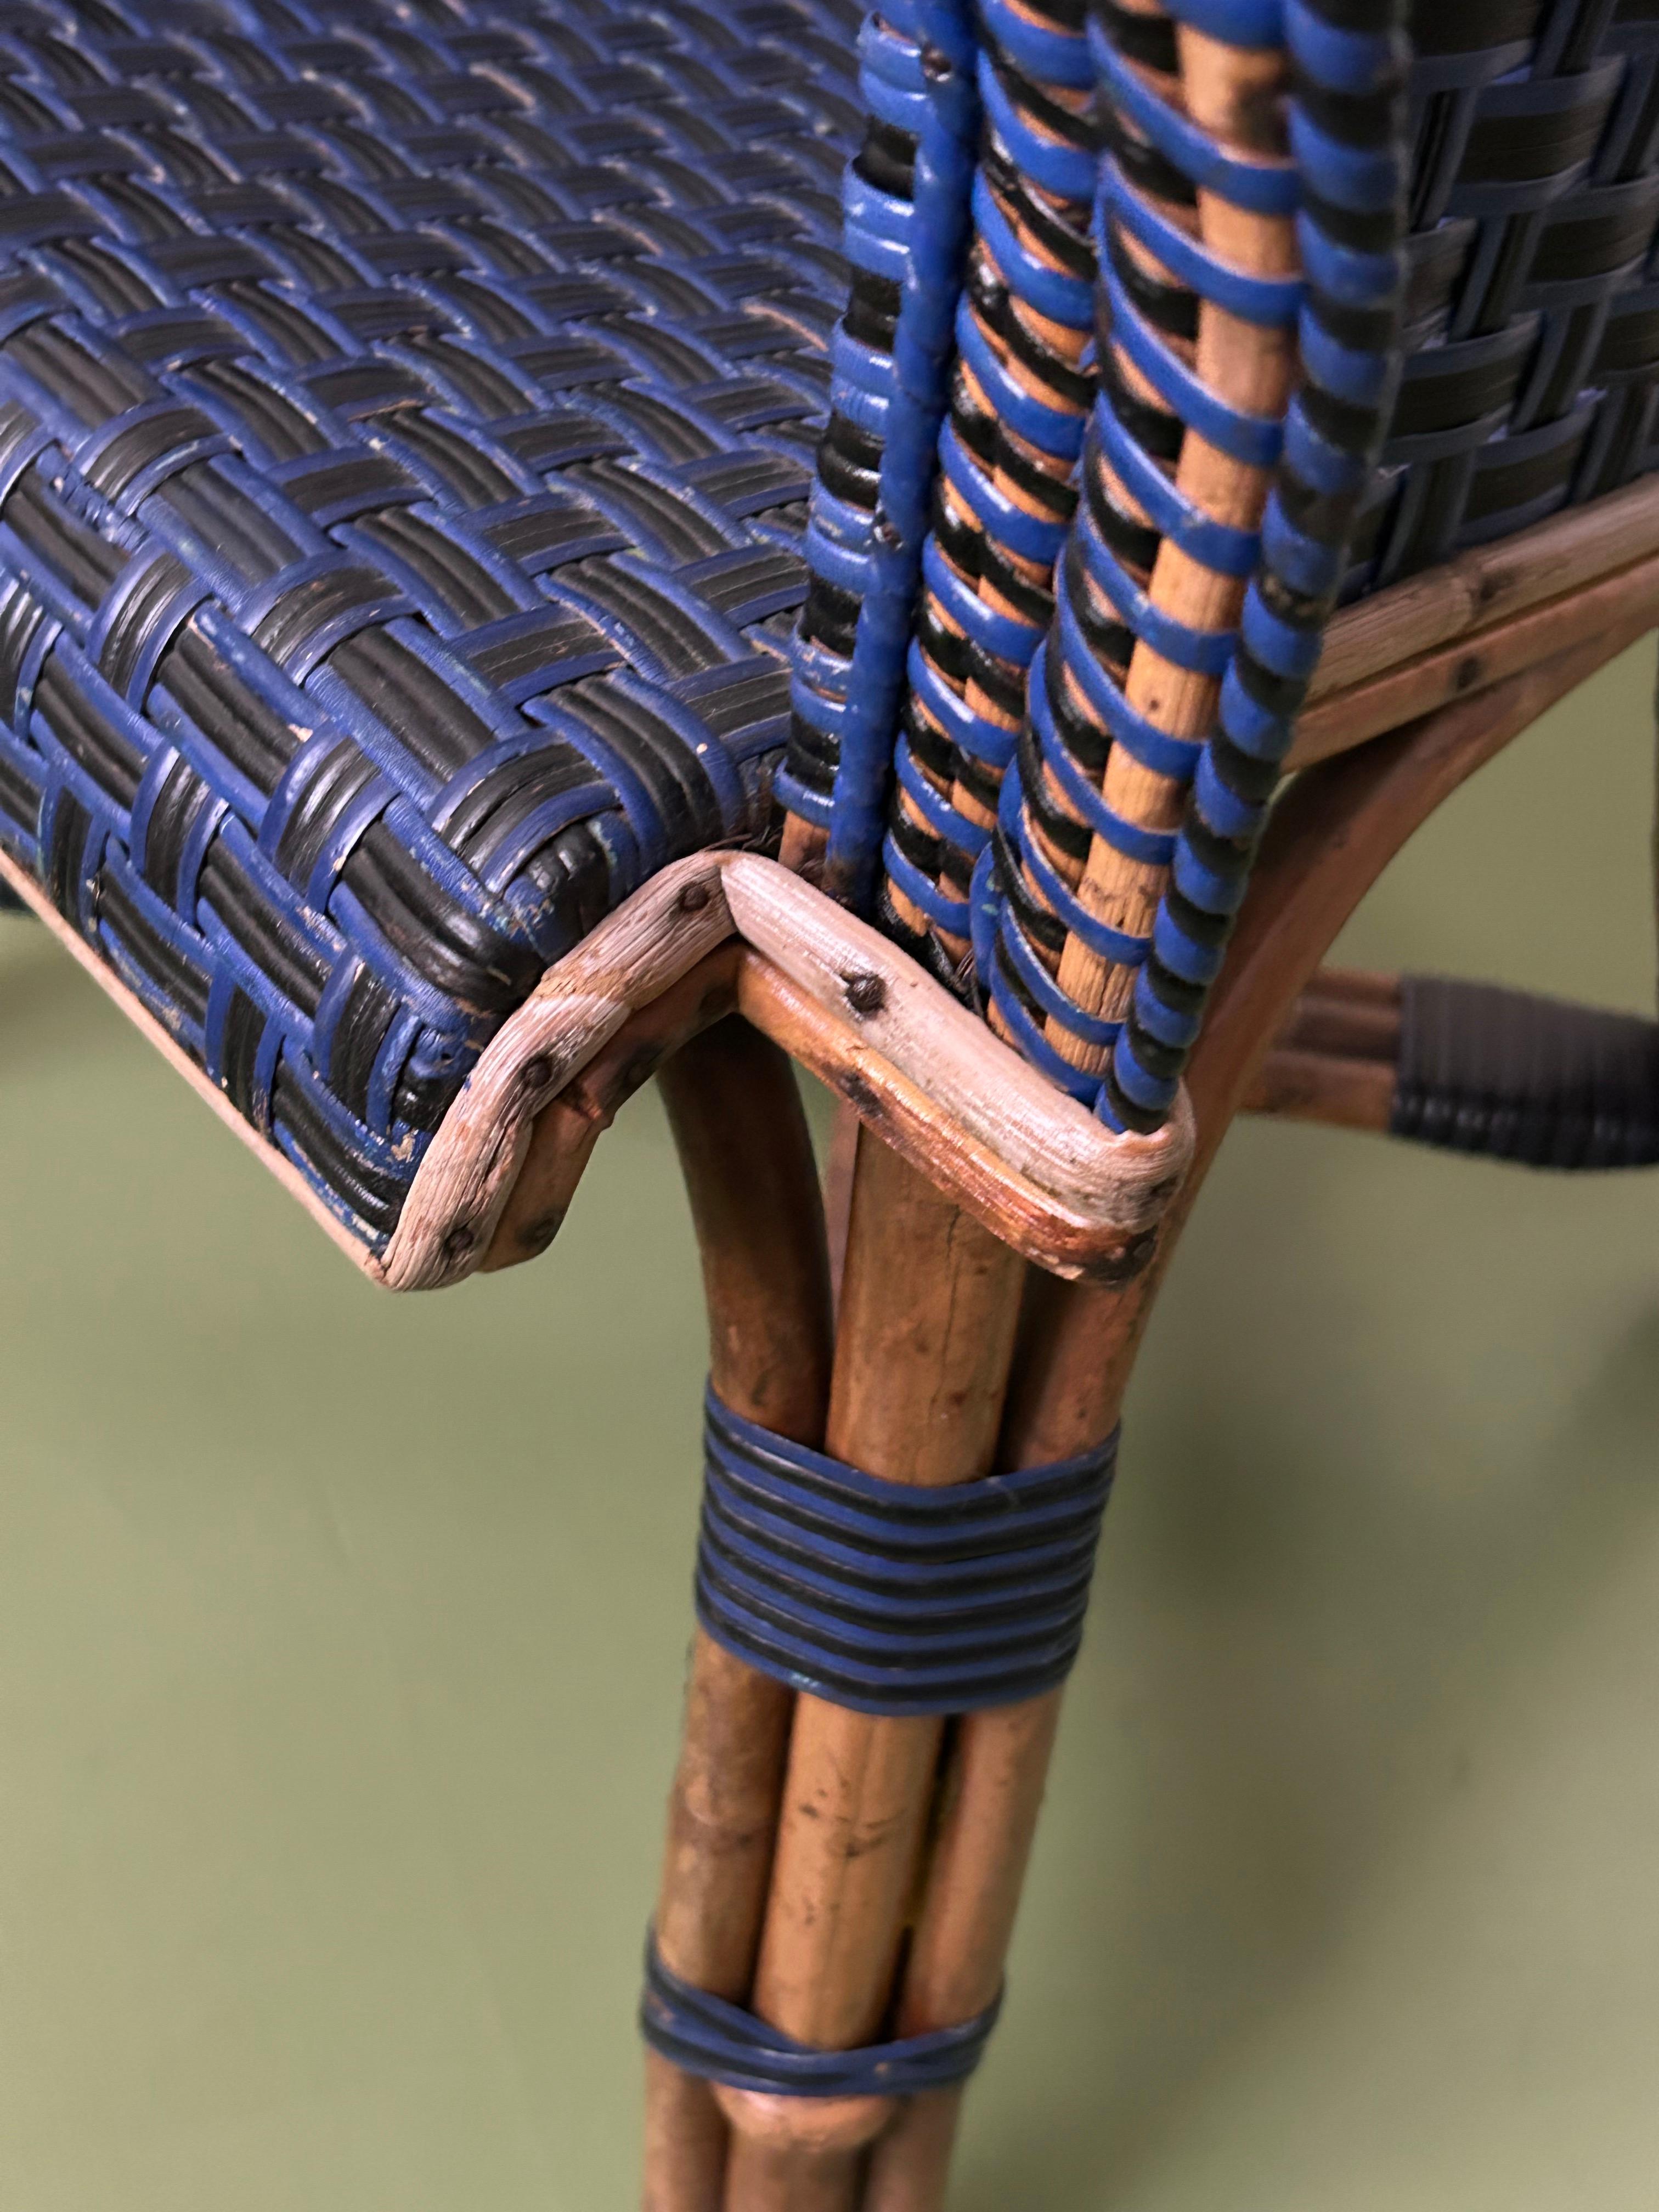 Vintage Rattan Chair in Black and Blue, France, Early 20th Century For Sale 9